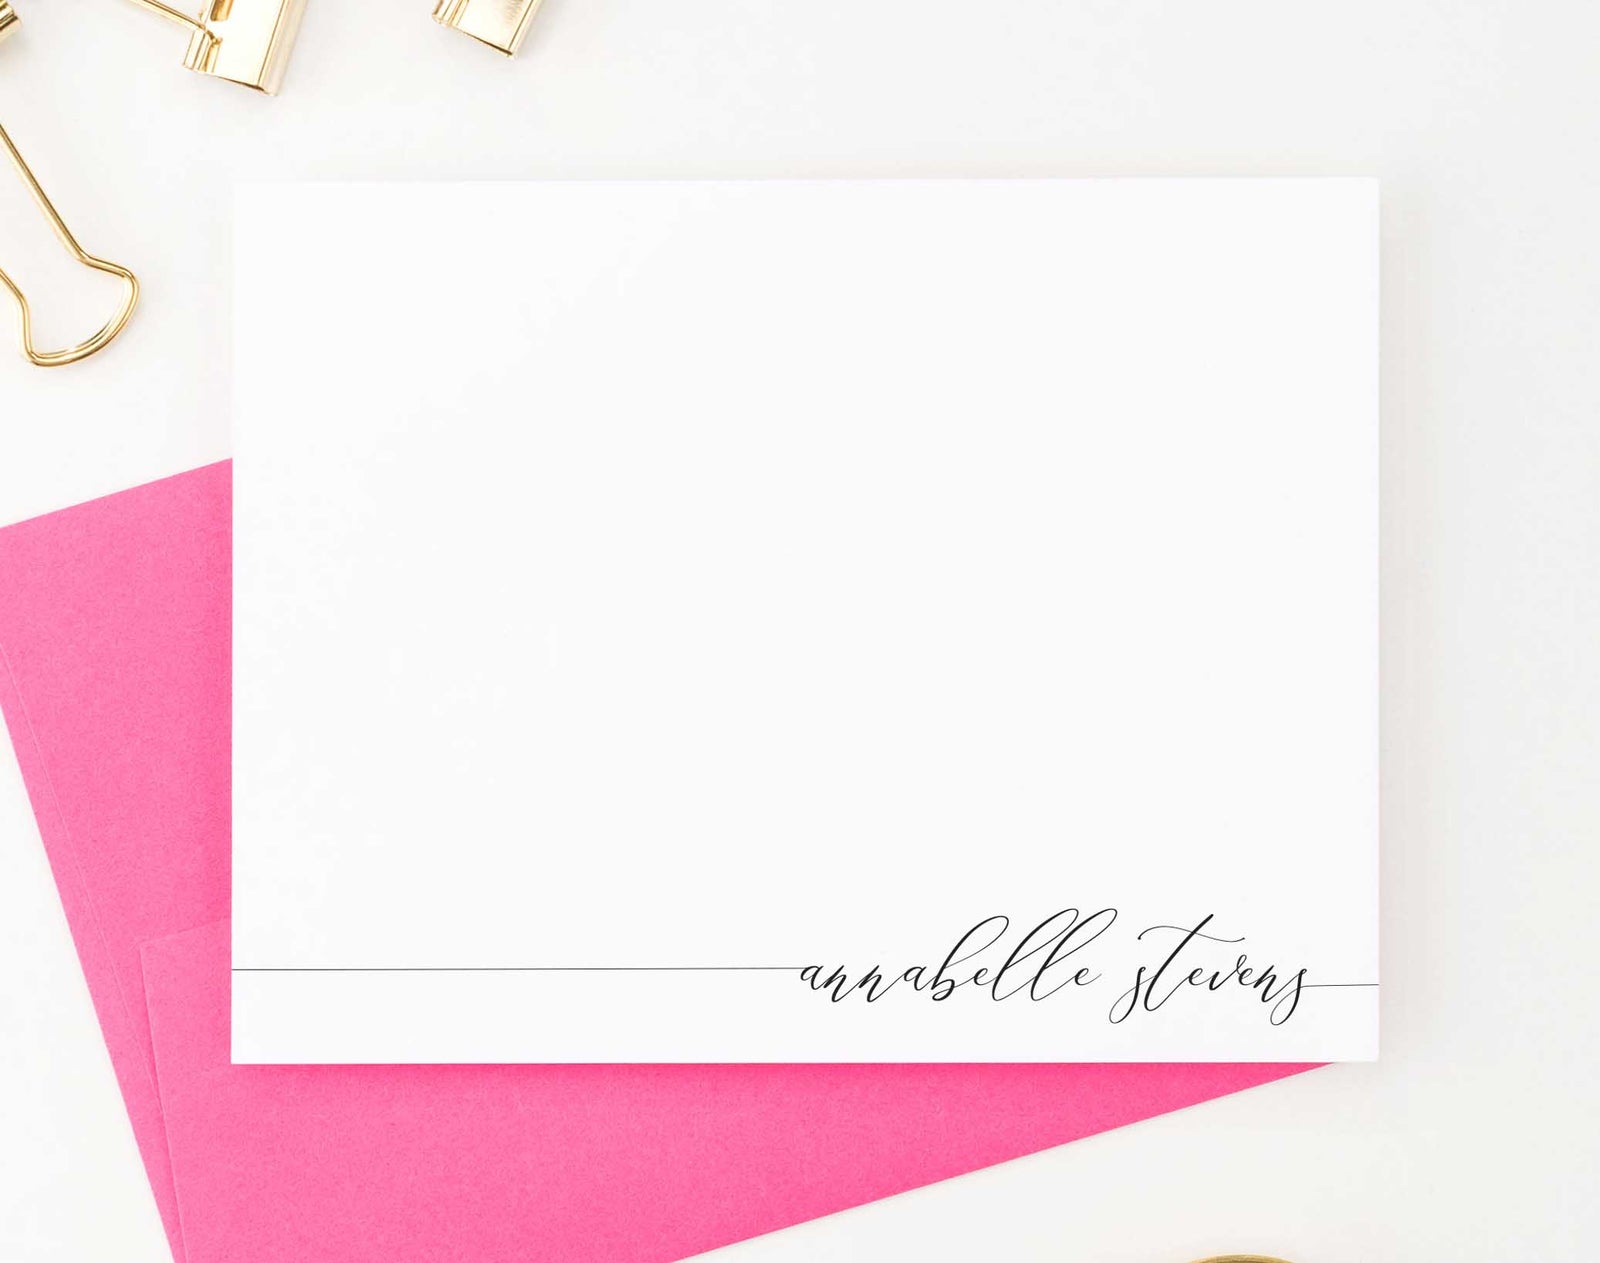 Personalized Name and Border Note Pads for Men and Women